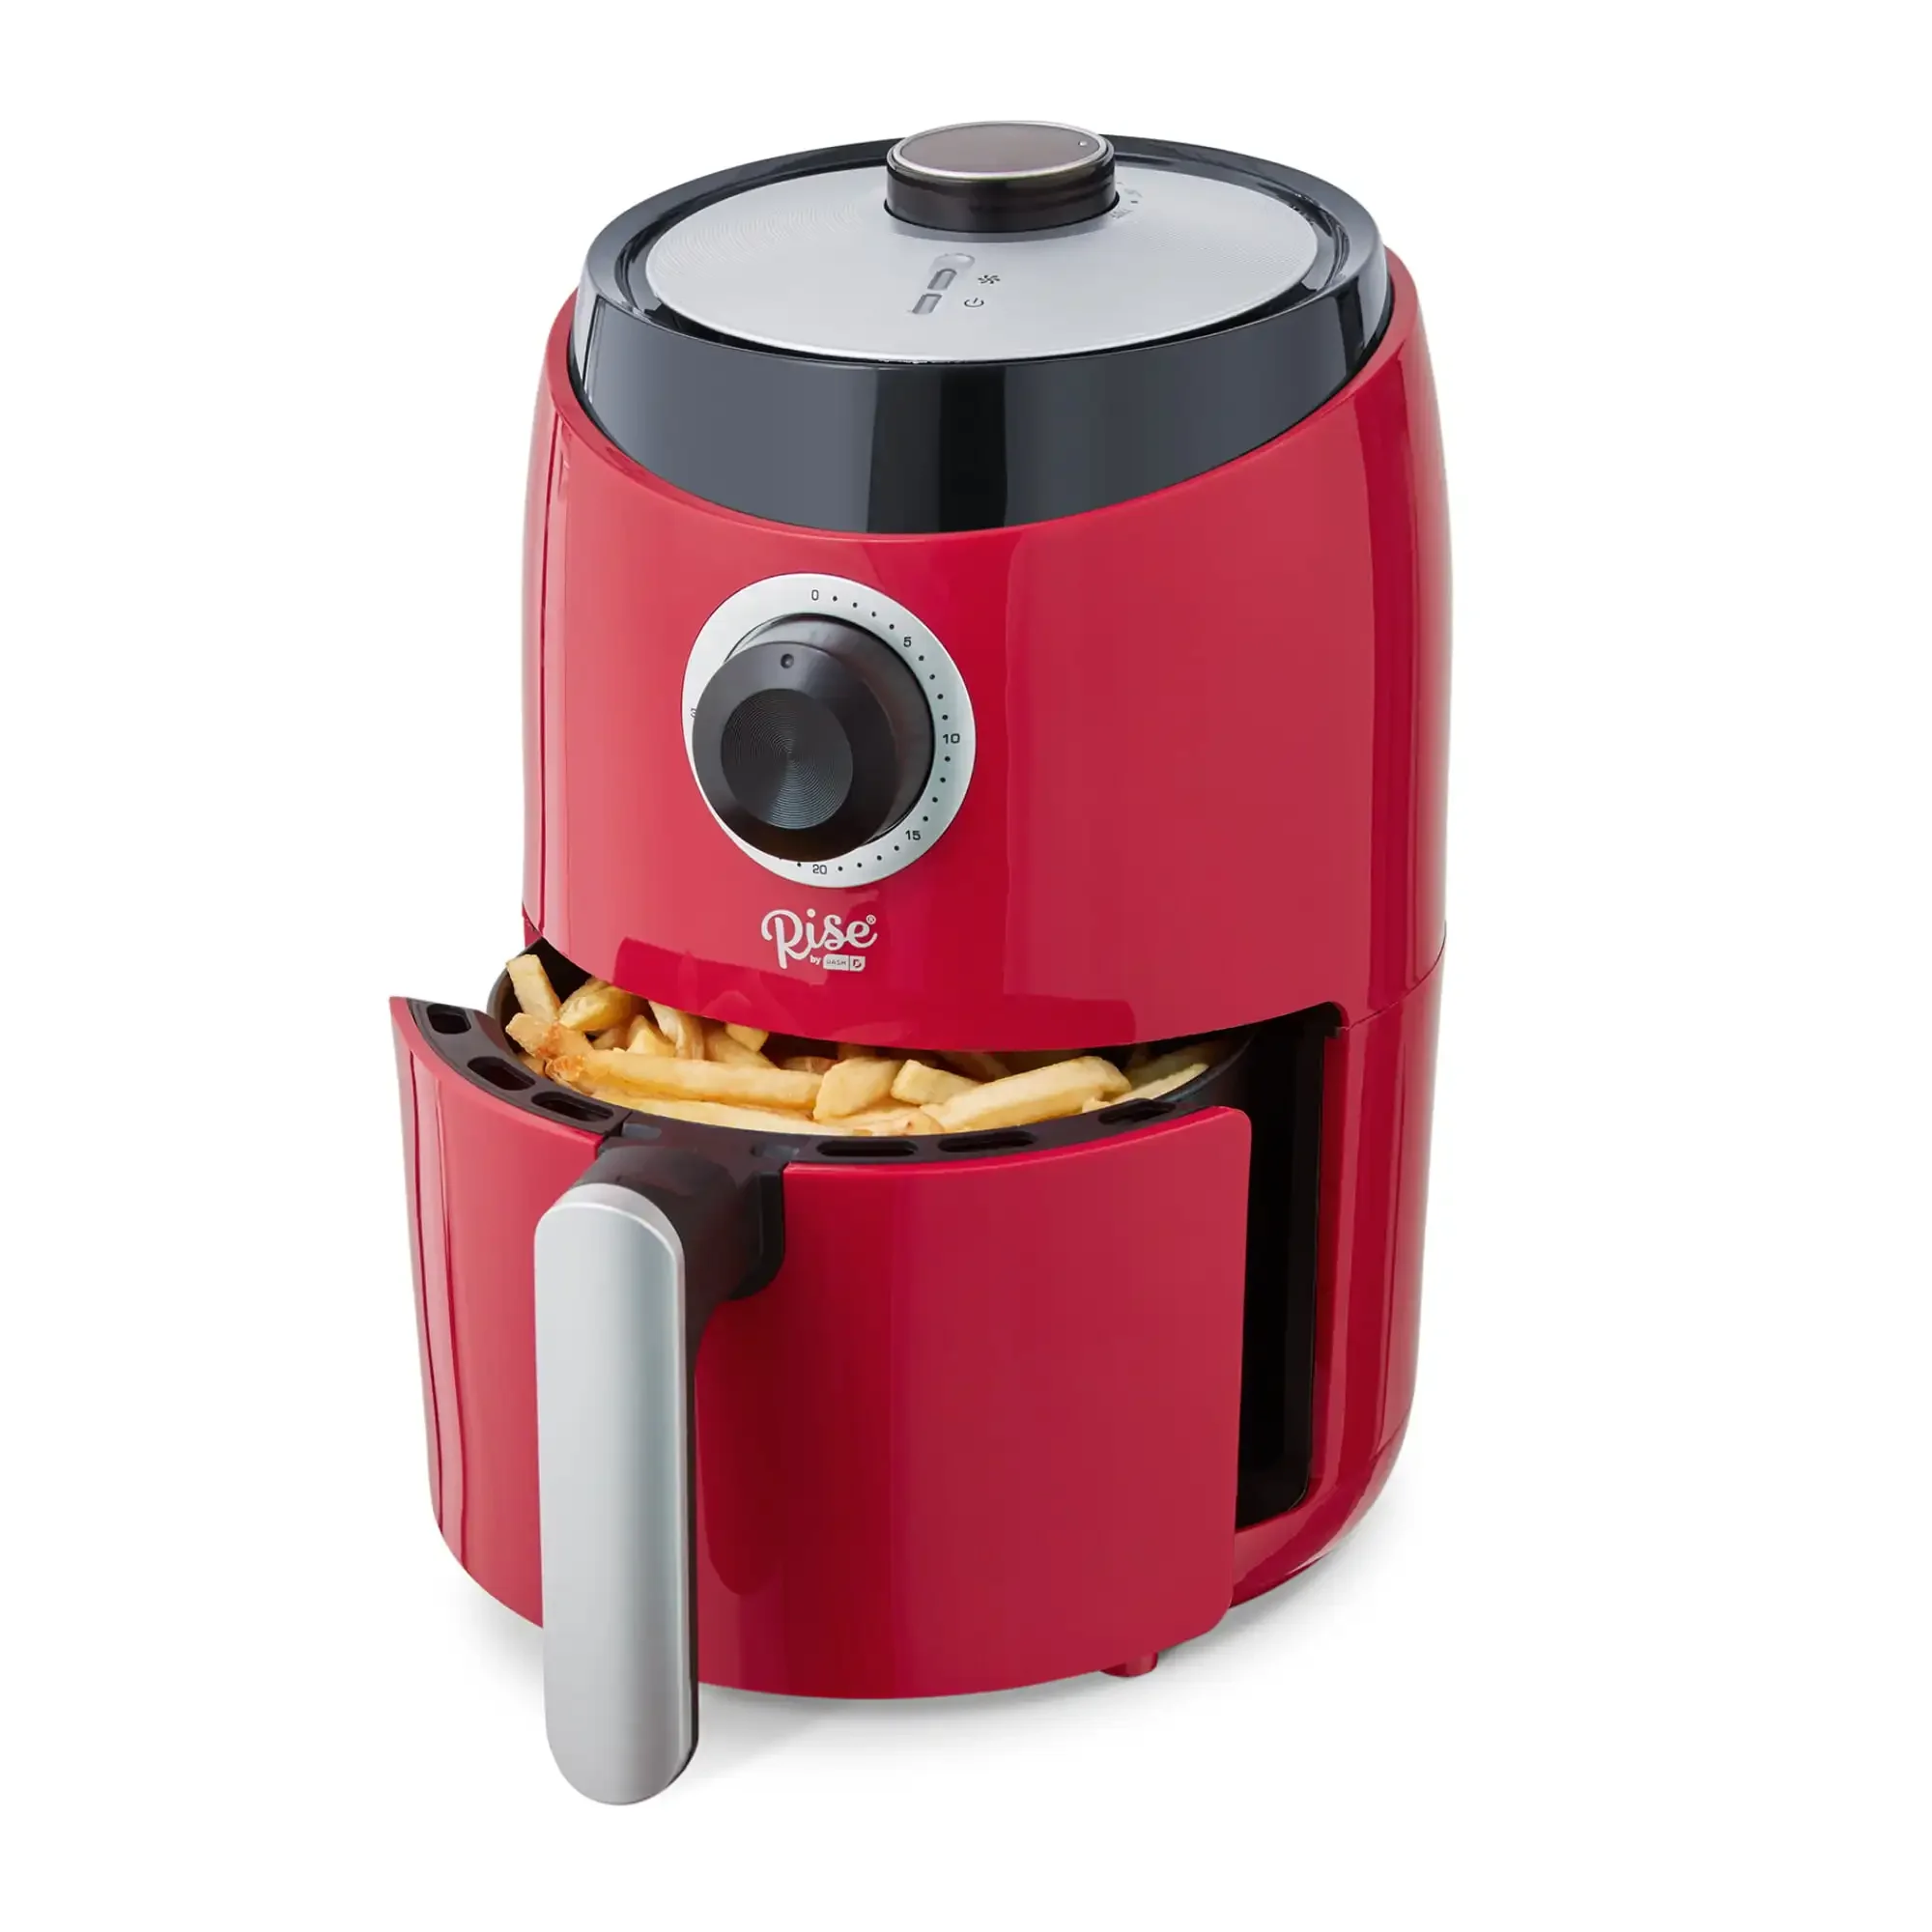 https://ae01.alicdn.com/kf/Sb27f0ac23eda48b48a49ae2cfd8dd937z/Rise-By-Dash-Compact-Air-Fryer-Oven-with-Temp-Control-Non-Stick-Basket-Recipes-Auto-Shut.jpg